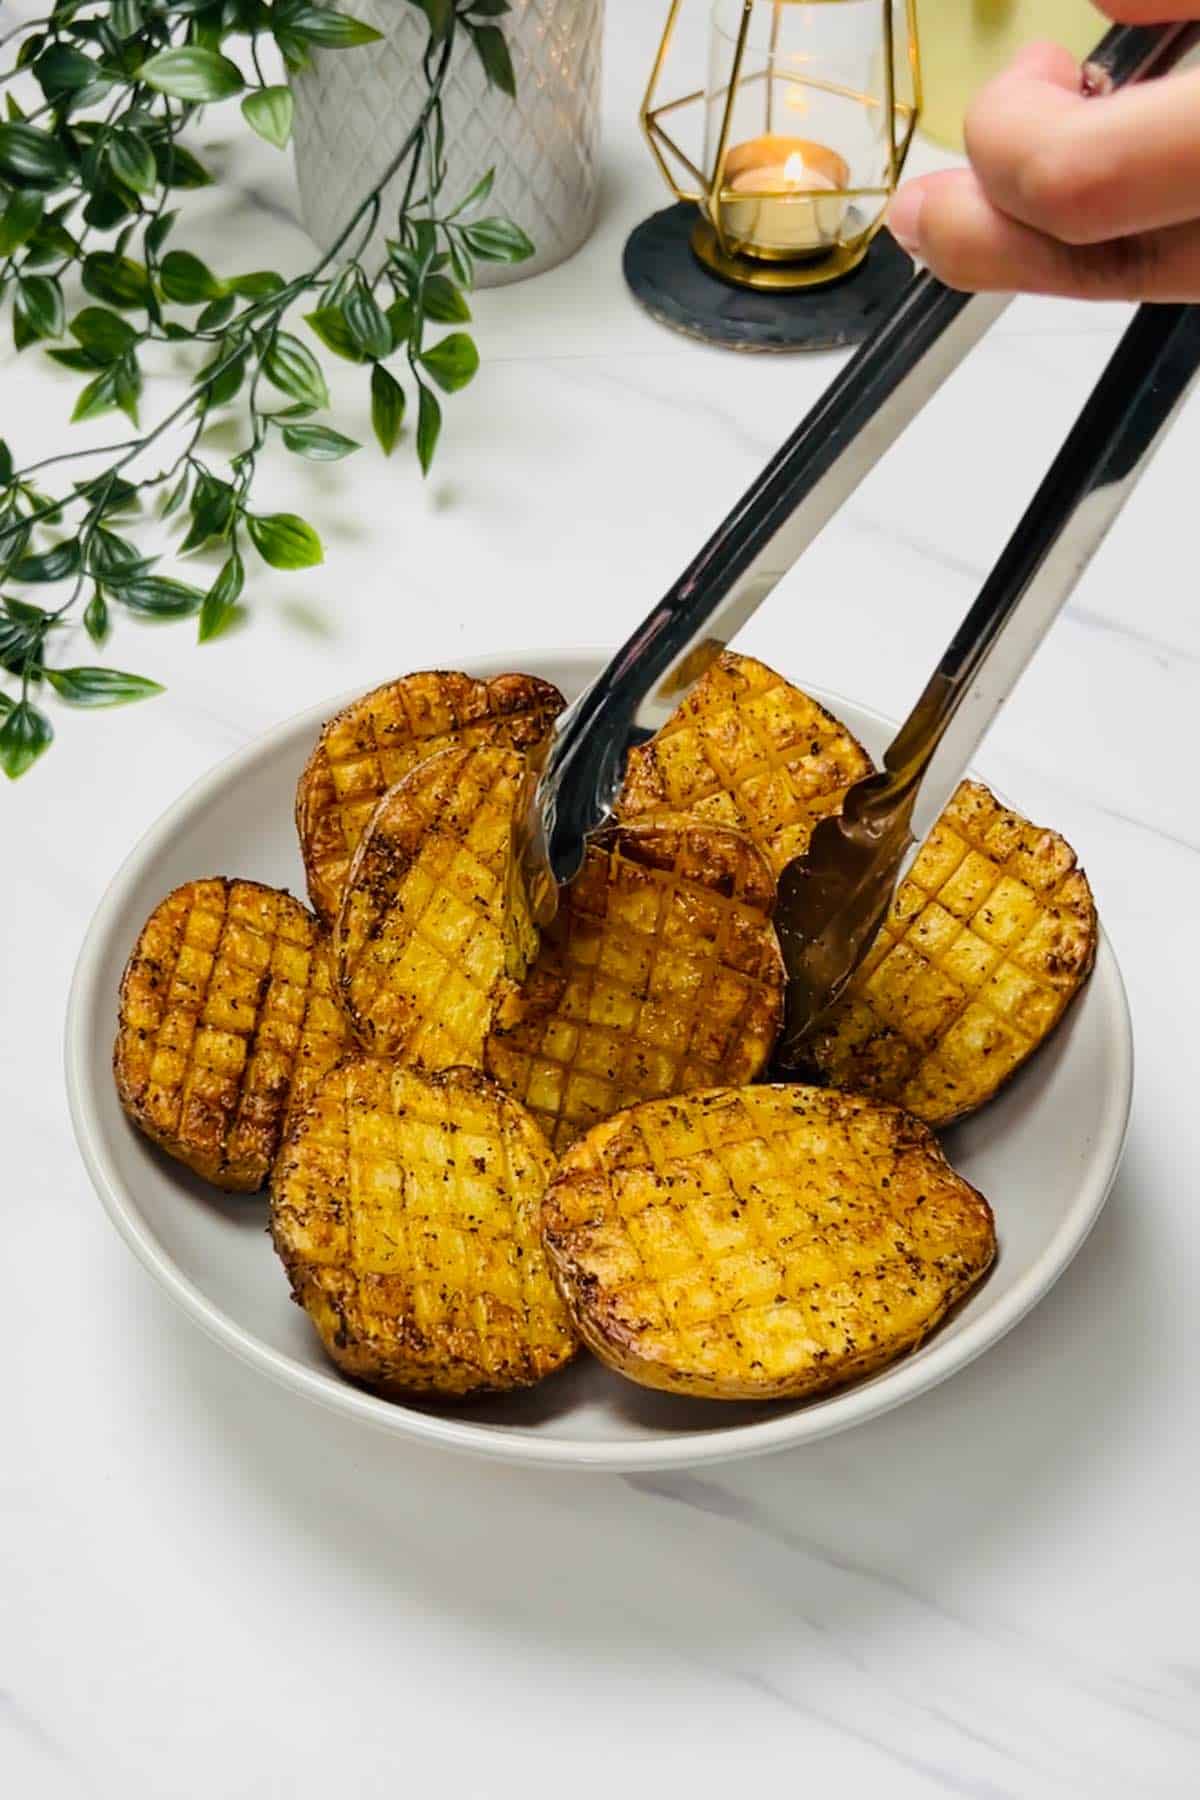 transferring cooked potatoes from air fryer to a plate